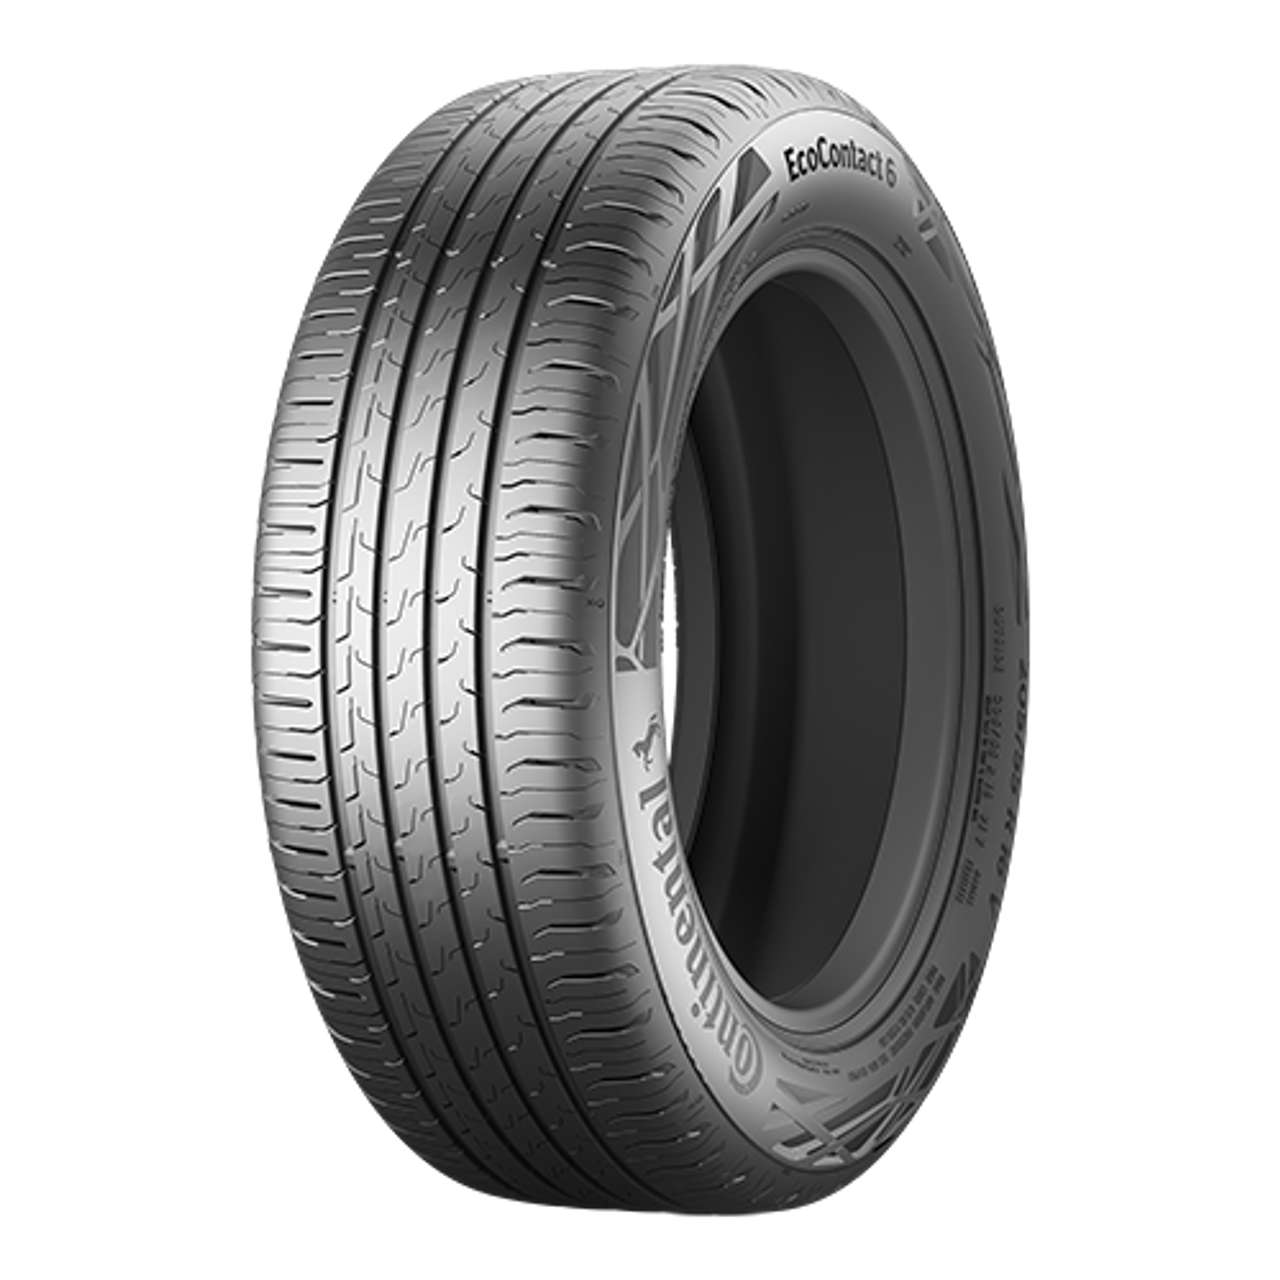 CONTINENTAL ECOCONTACT 6 (AO) (EVc) 235/55R18 100Y 